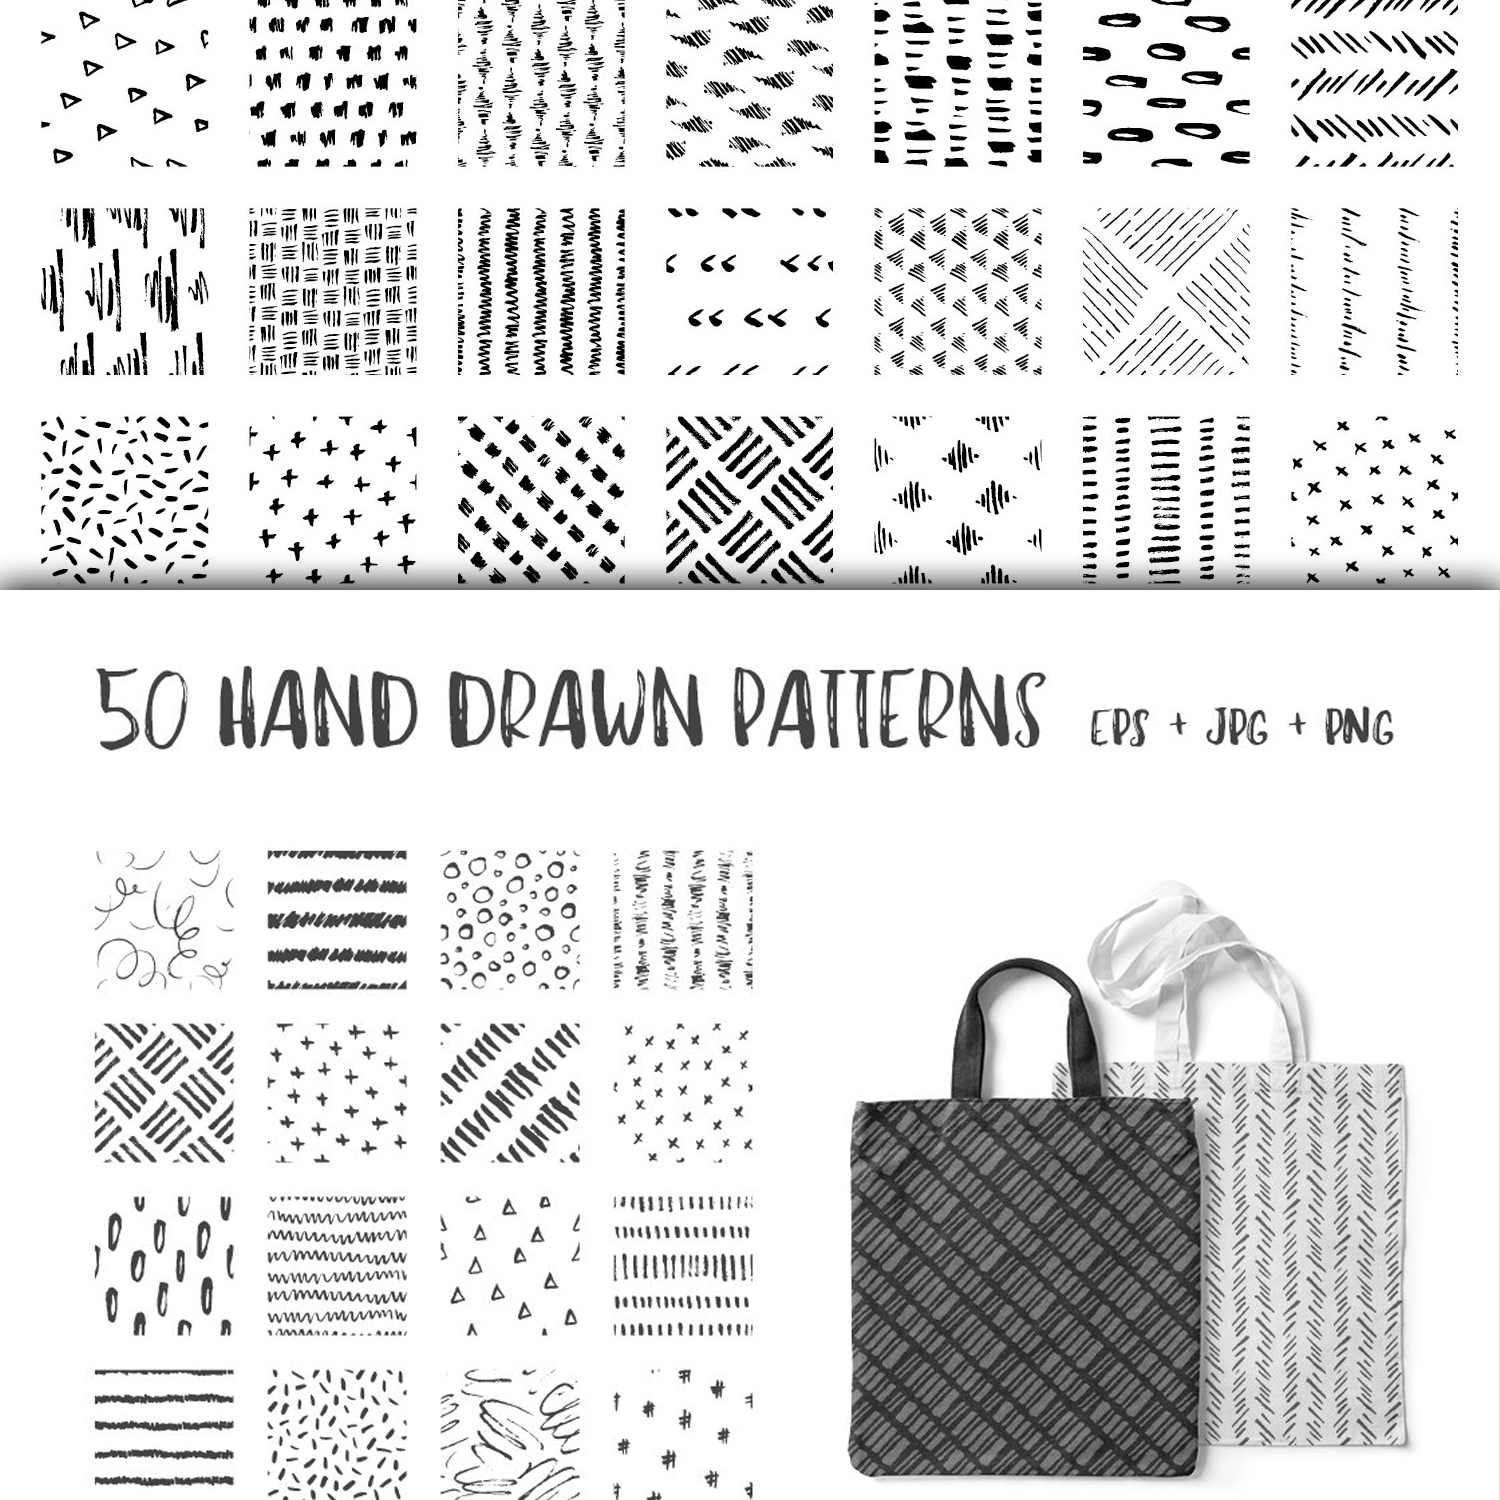 Preview hand drawn pen ink patterns.